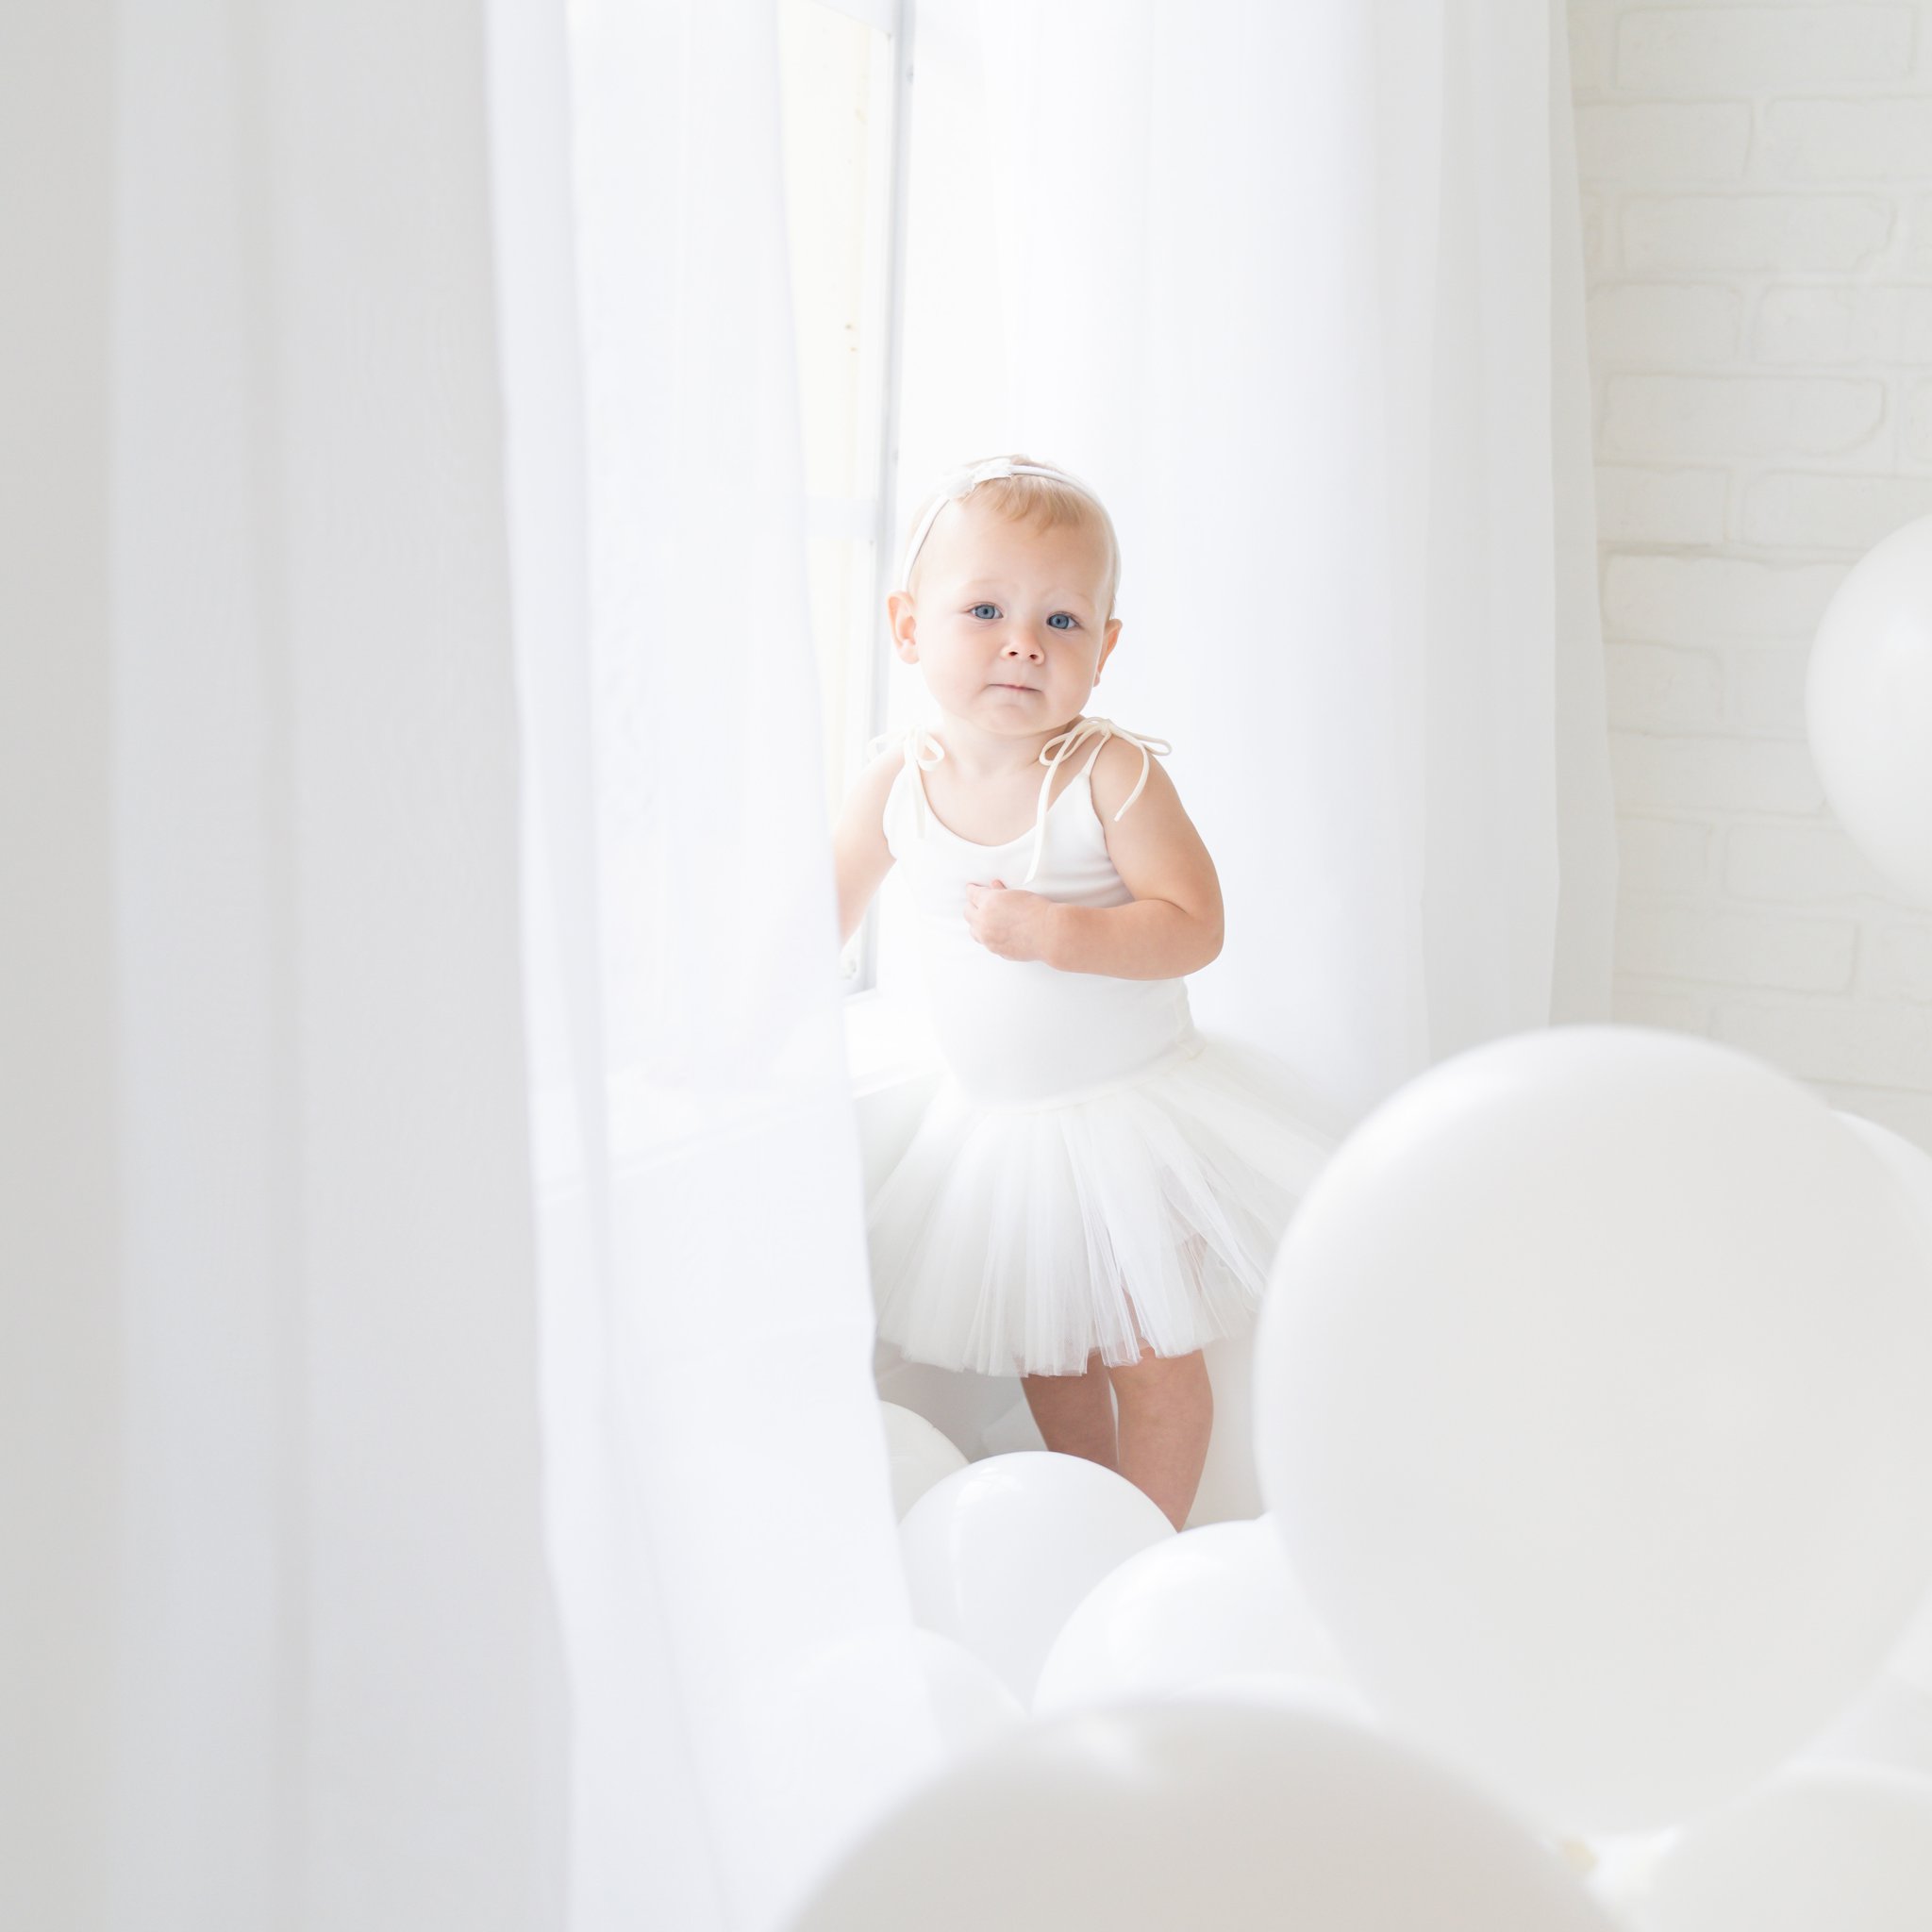 One year old baby, surrounded by white balloons, being photographed next to a large sunny window.